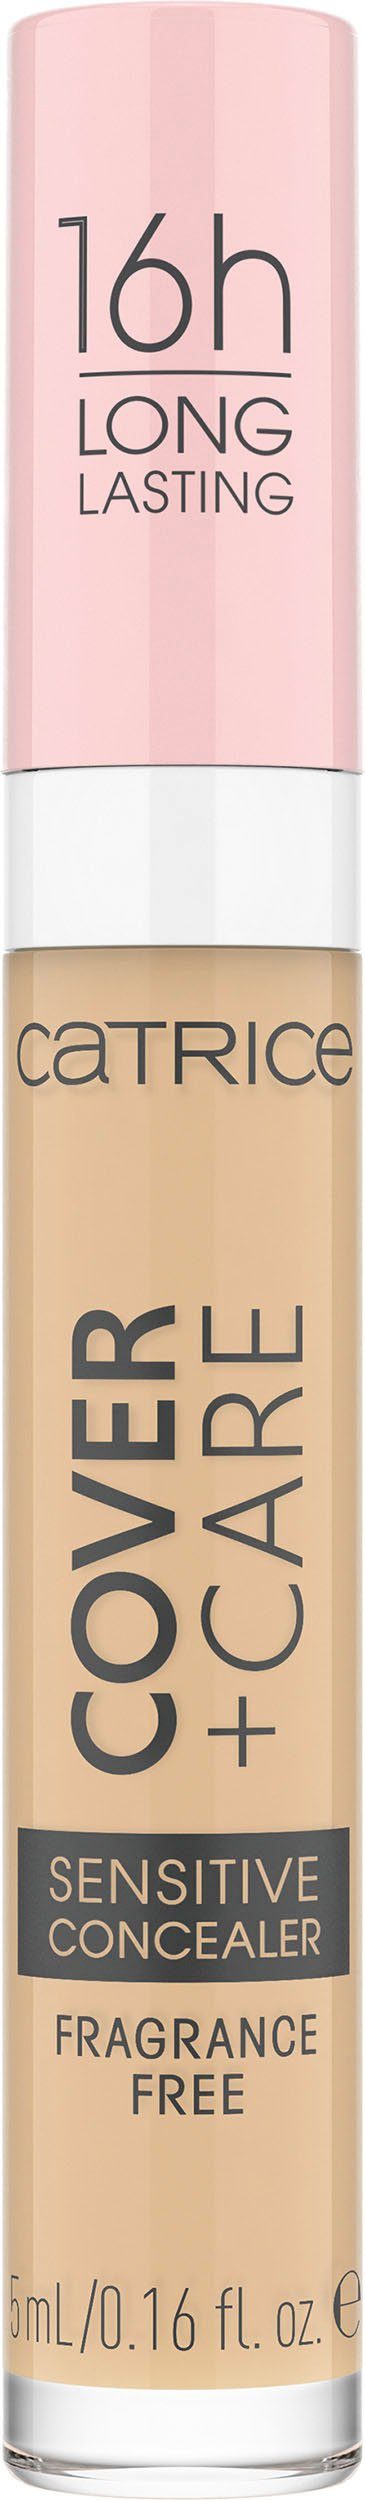 Sensitive Concealer 3-tlg. Care nude Concealer, + Catrice Cover Catrice 008W